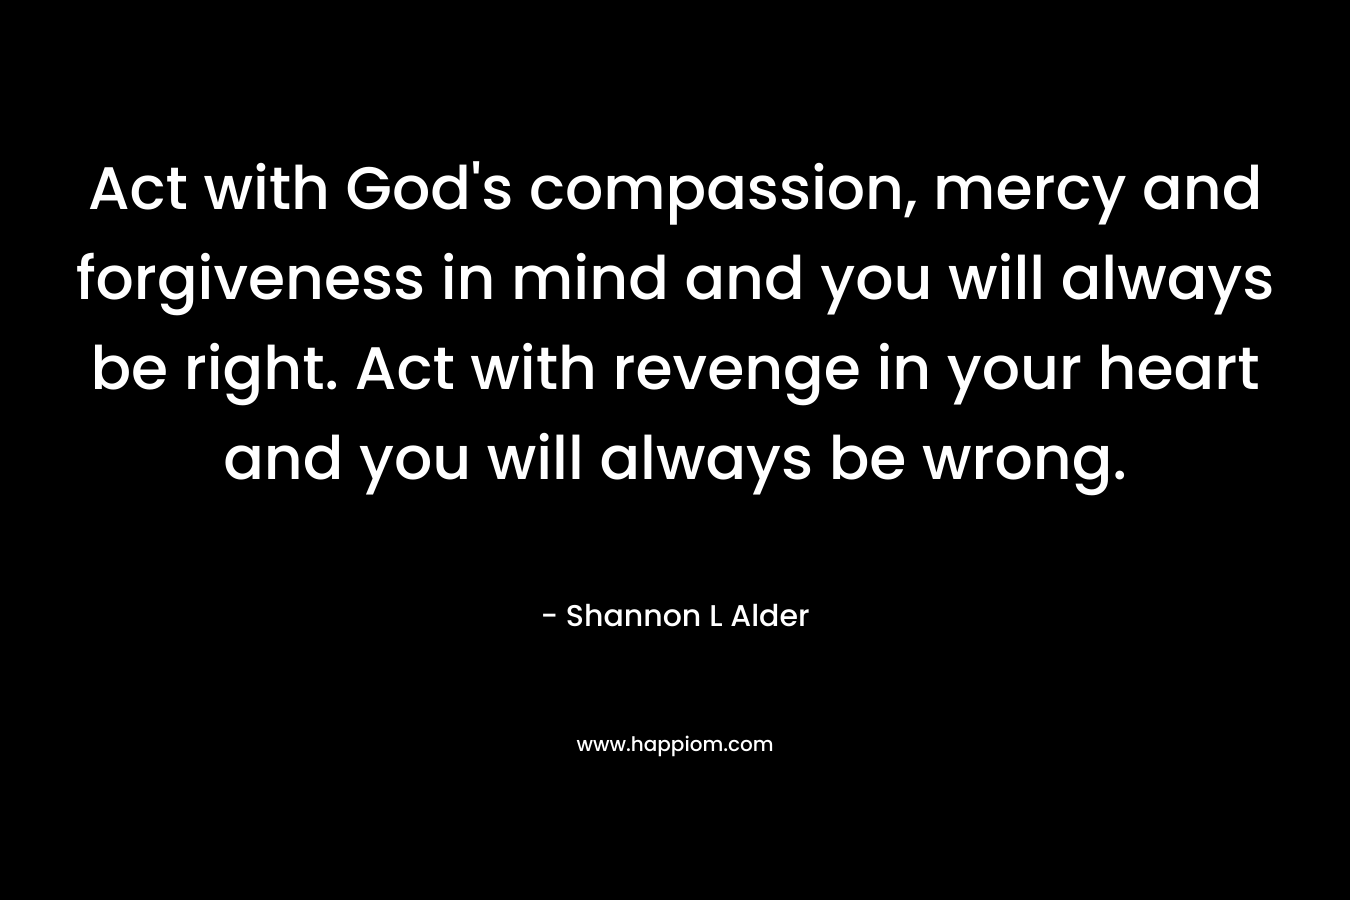 Act with God's compassion, mercy and forgiveness in mind and you will always be right. Act with revenge in your heart and you will always be wrong.